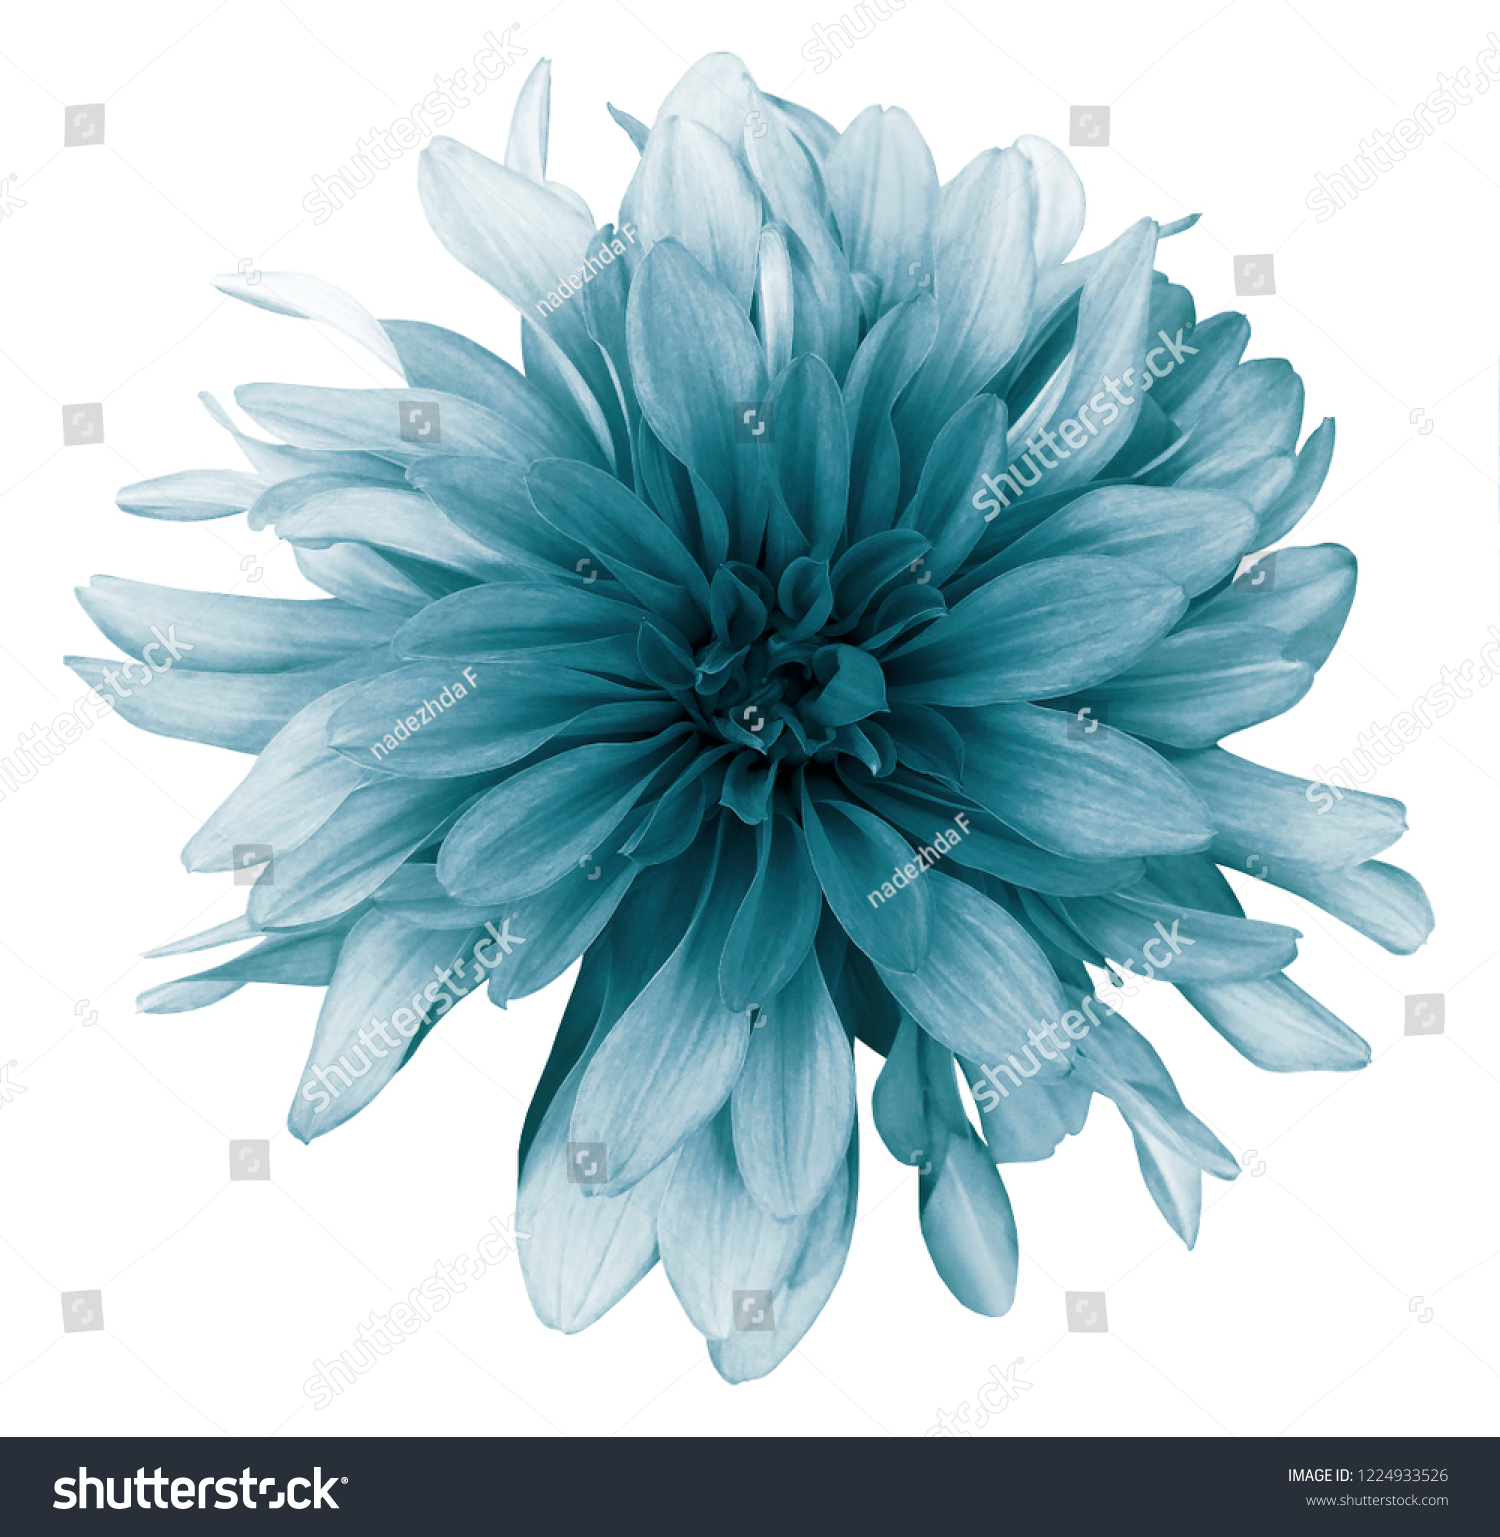 Vintage turquoise dahlia  flower white  background isolated  with clipping path. Closeup. For design. Nature.  #1224933526